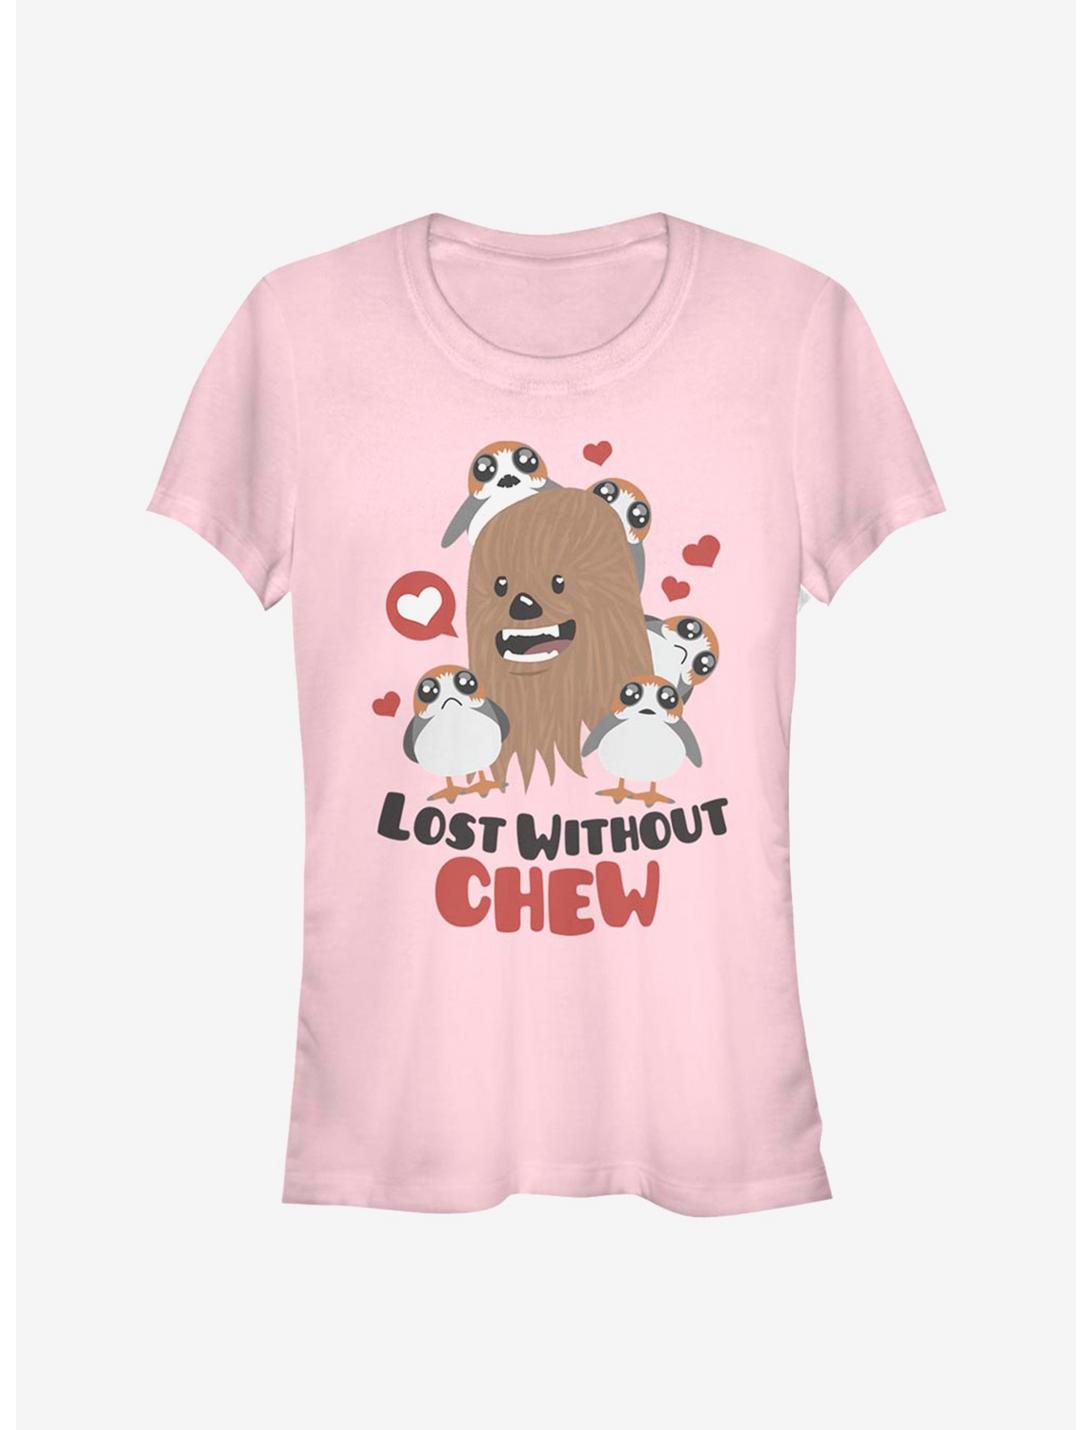 Star Wars Episode VIII The Last Jedi Lost Without Chew Girls T-Shirt, LIGHT PINK, hi-res